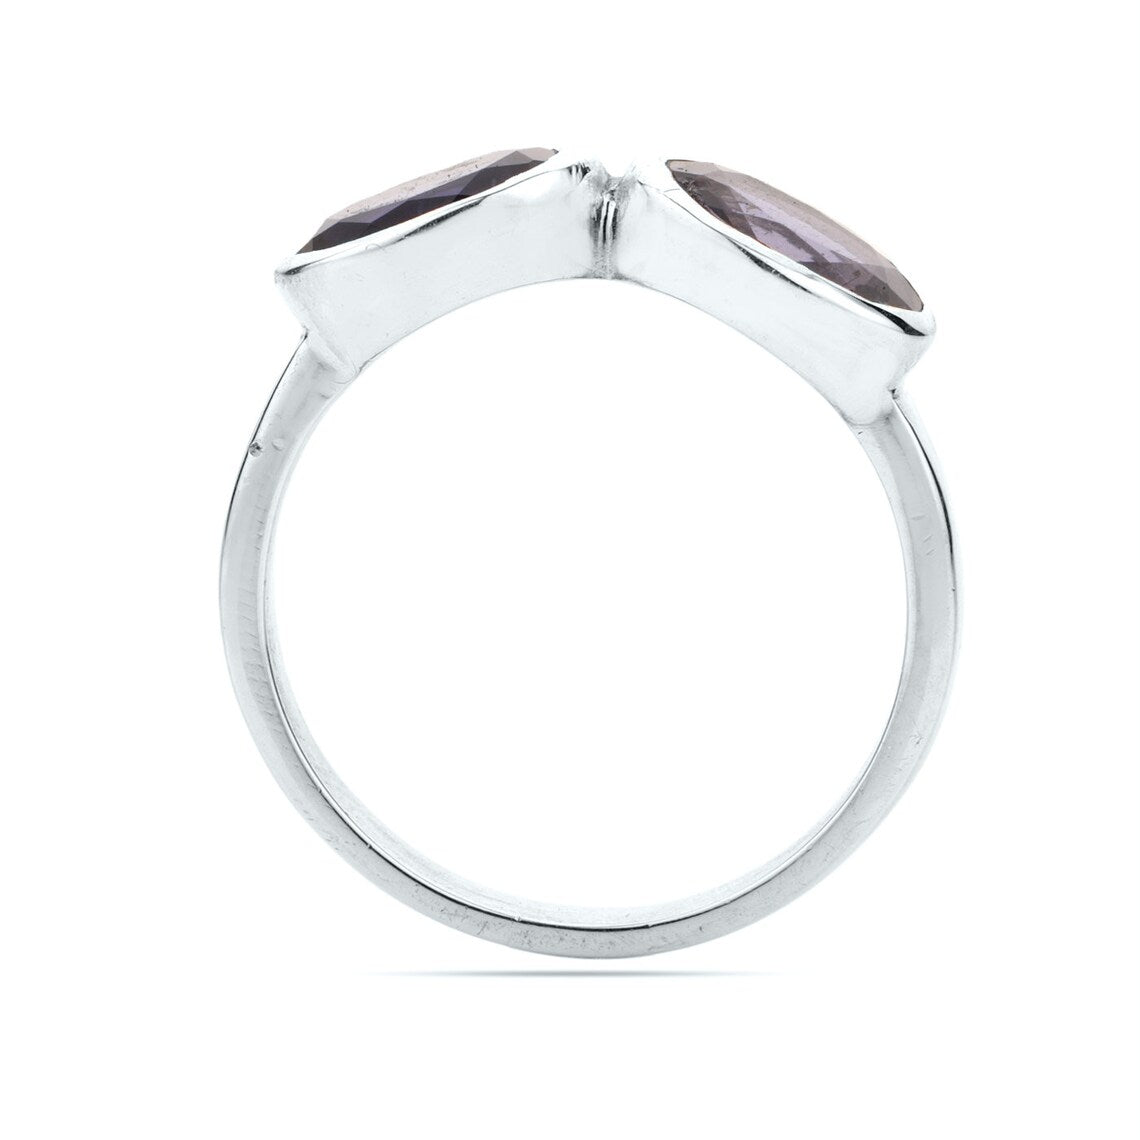 iolite oval faceted ring - iolite gemstone ring - iolite sterling silver ring - two gemstone ring